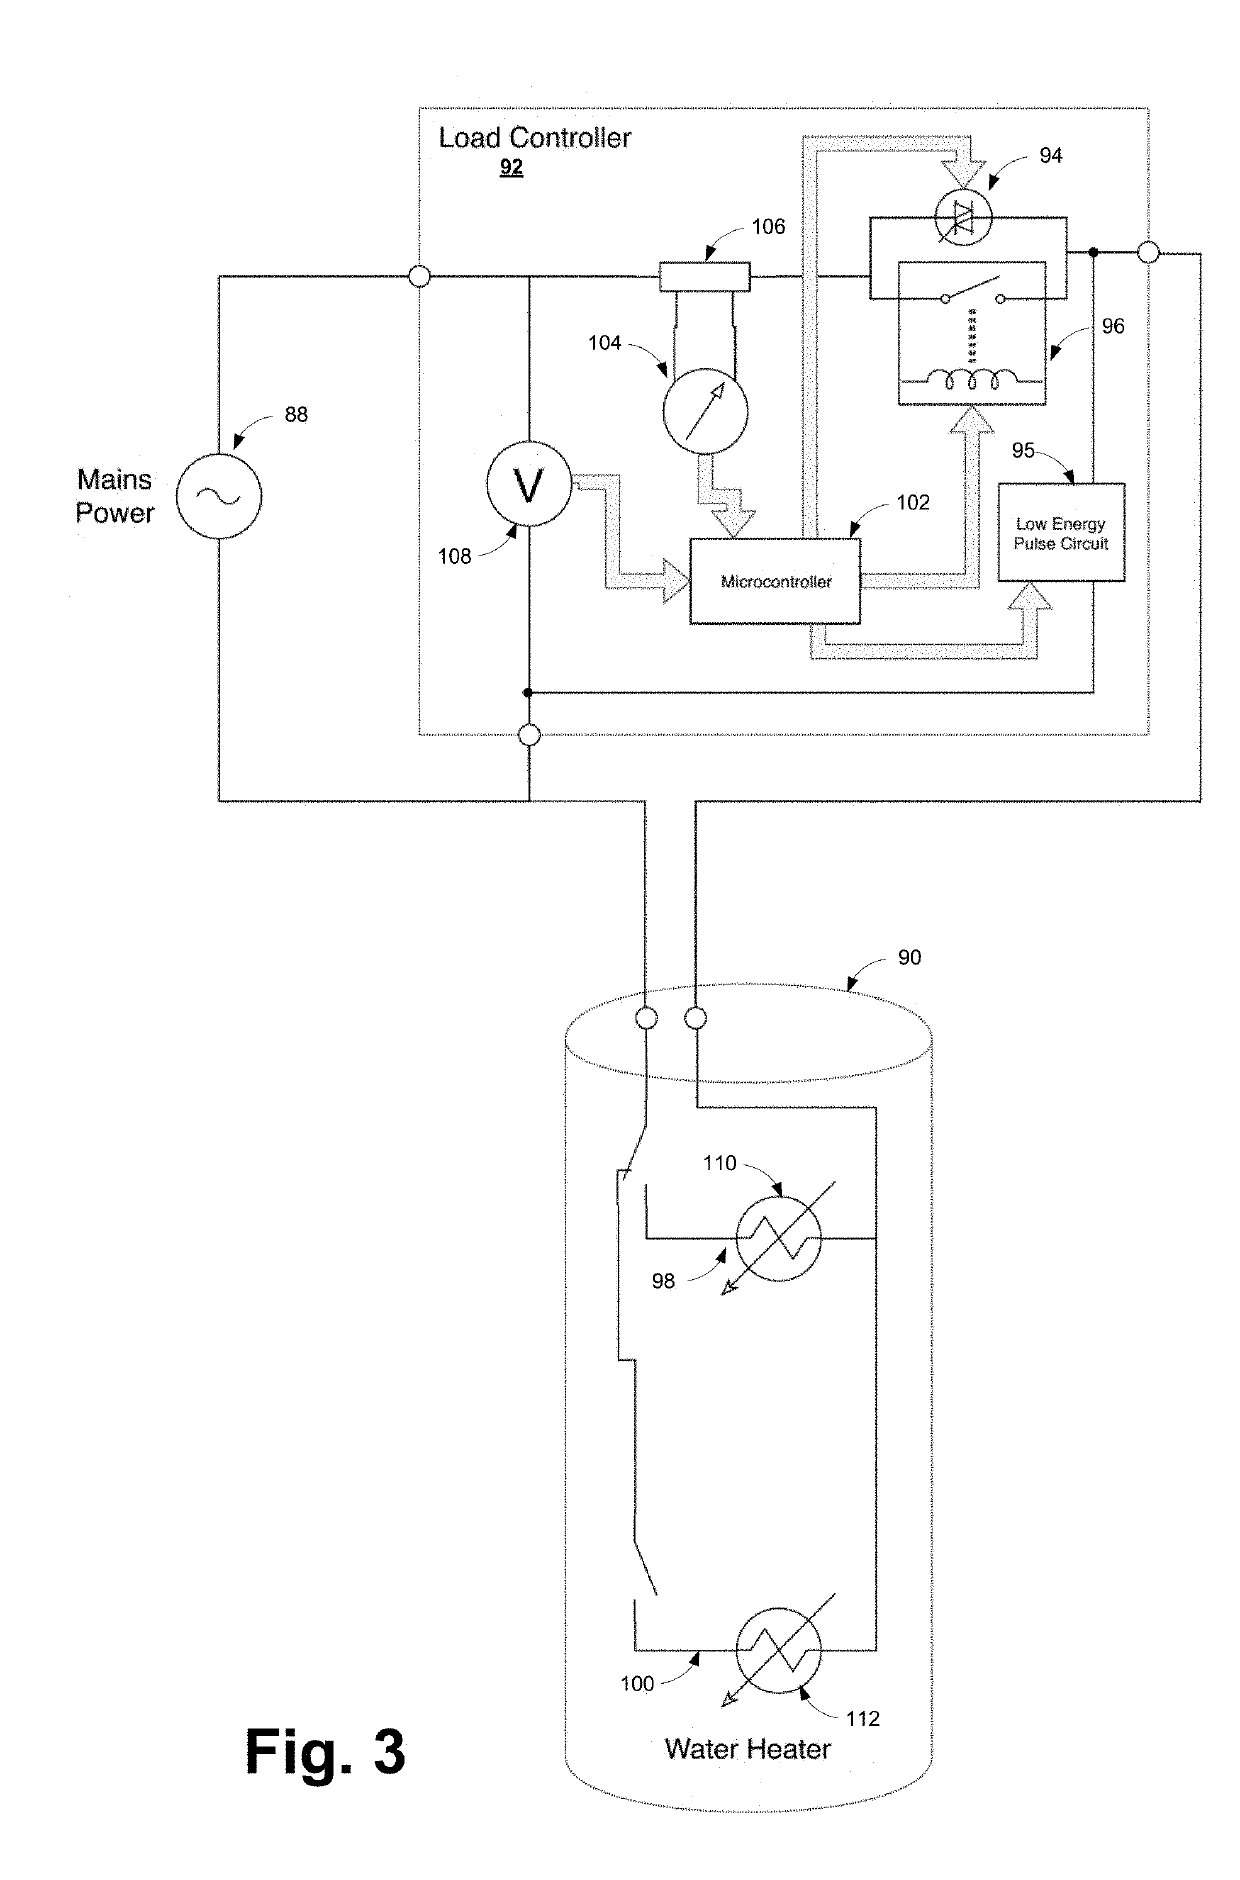 Estimation of temperature states for an electric water heater from inferred resistance measurement